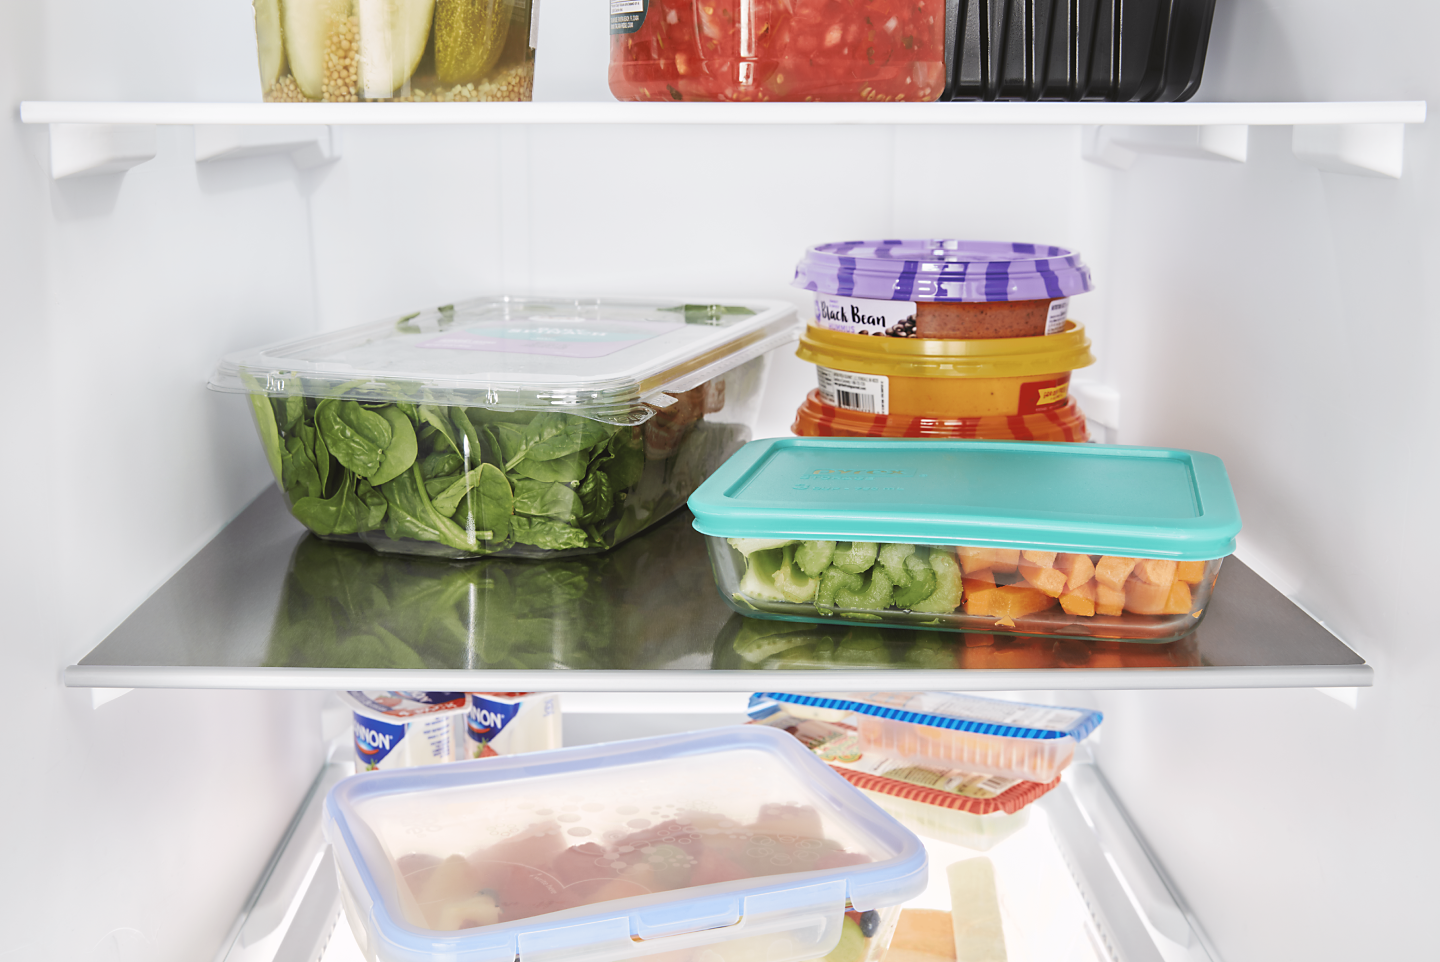 https://kitchenaid-h.assetsadobe.com/is/image/content/dam/business-unit/maytag/en-us/marketing-content/site-assets/page-content/oc-articles/how-to-organize-a-french-door-refrigerator/How-to-Organize-a-French-Door-Refrigerator_2.png?fmt=png-alpha&qlt=85,0&resMode=sharp2&op_usm=1.75,0.3,2,0&scl=1&constrain=fit,1